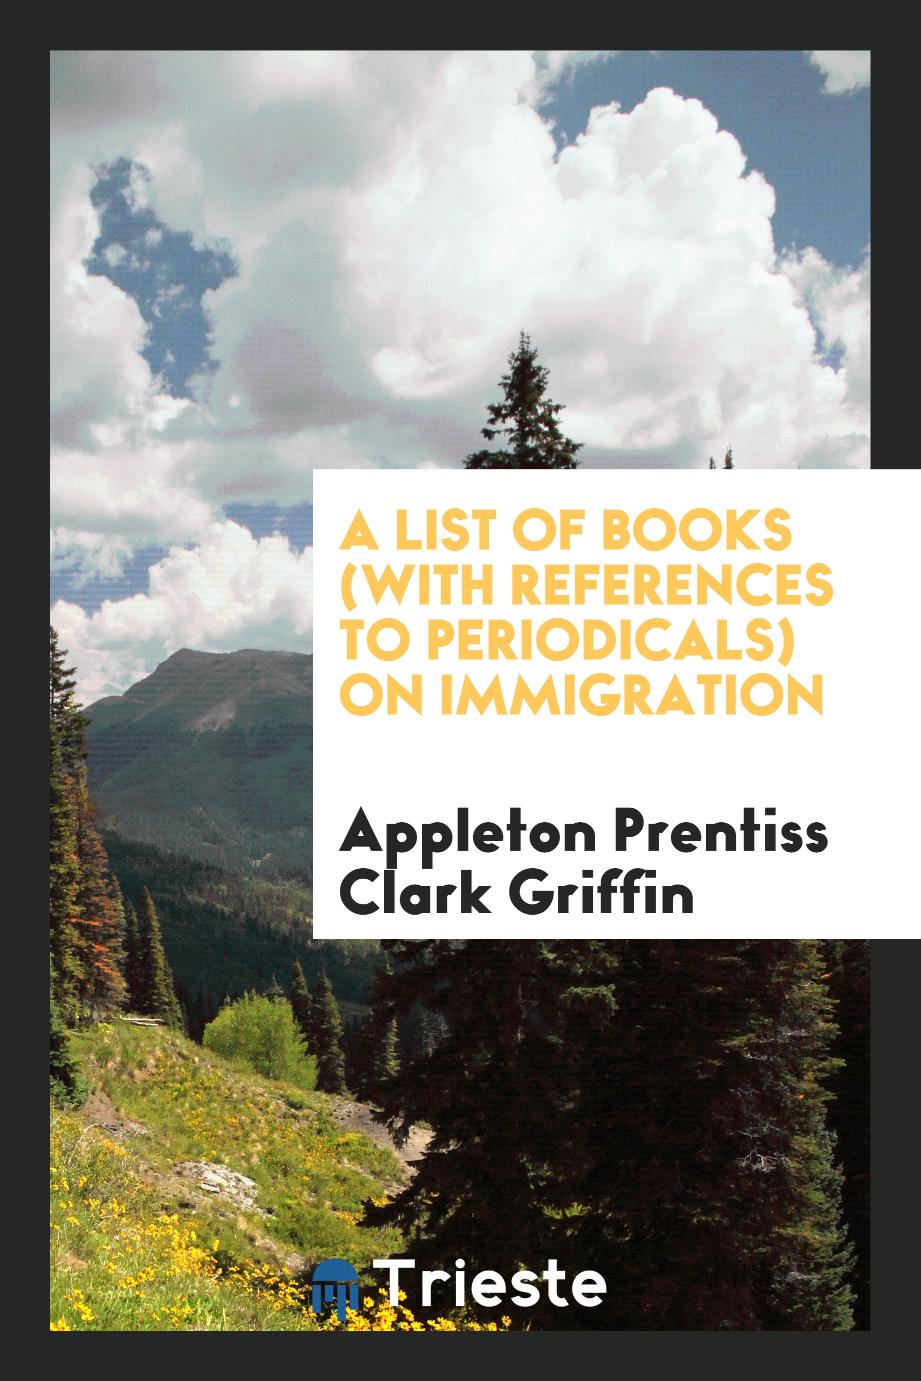 A List of Books (with References to Periodicals) on Immigration